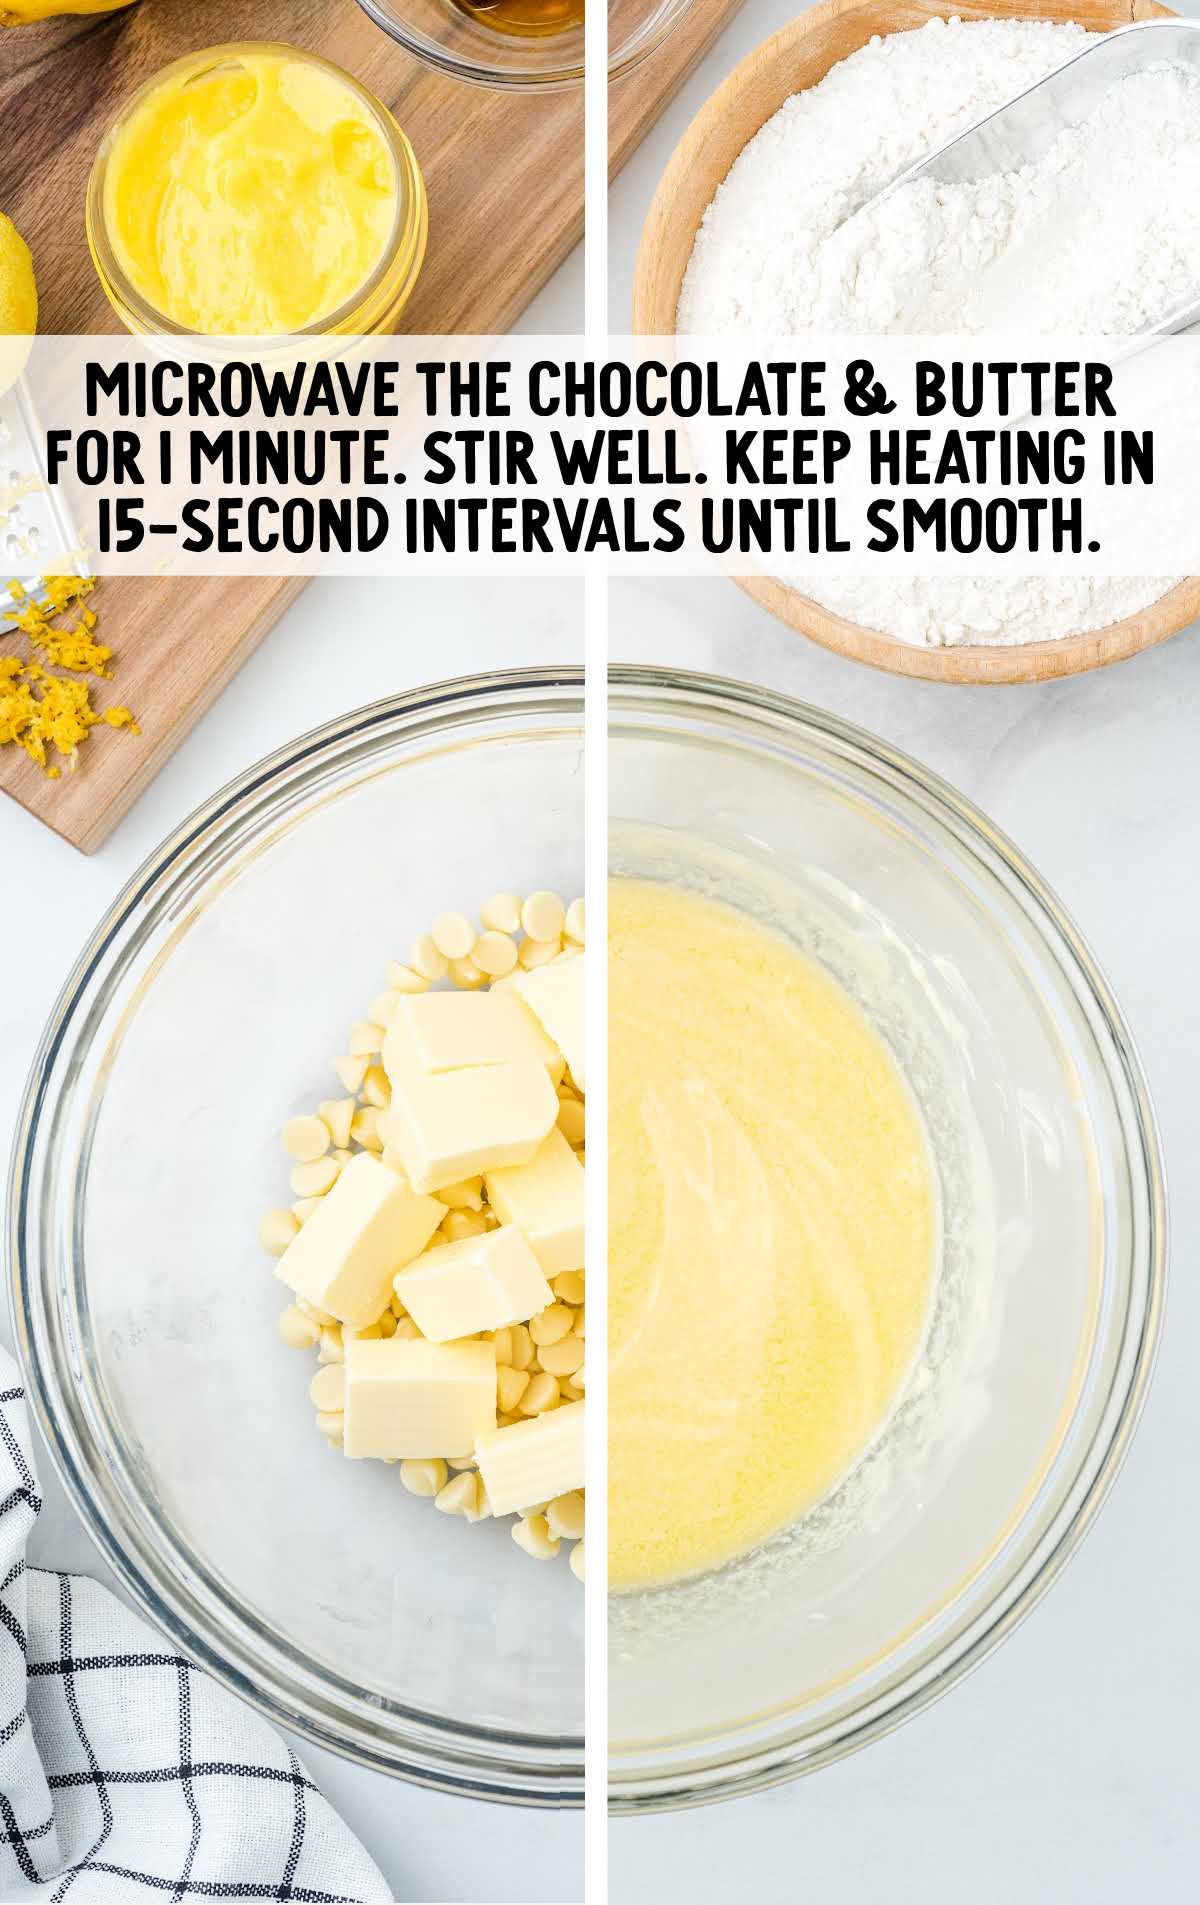 white chocolate chips and butter melted and combined in a bowl